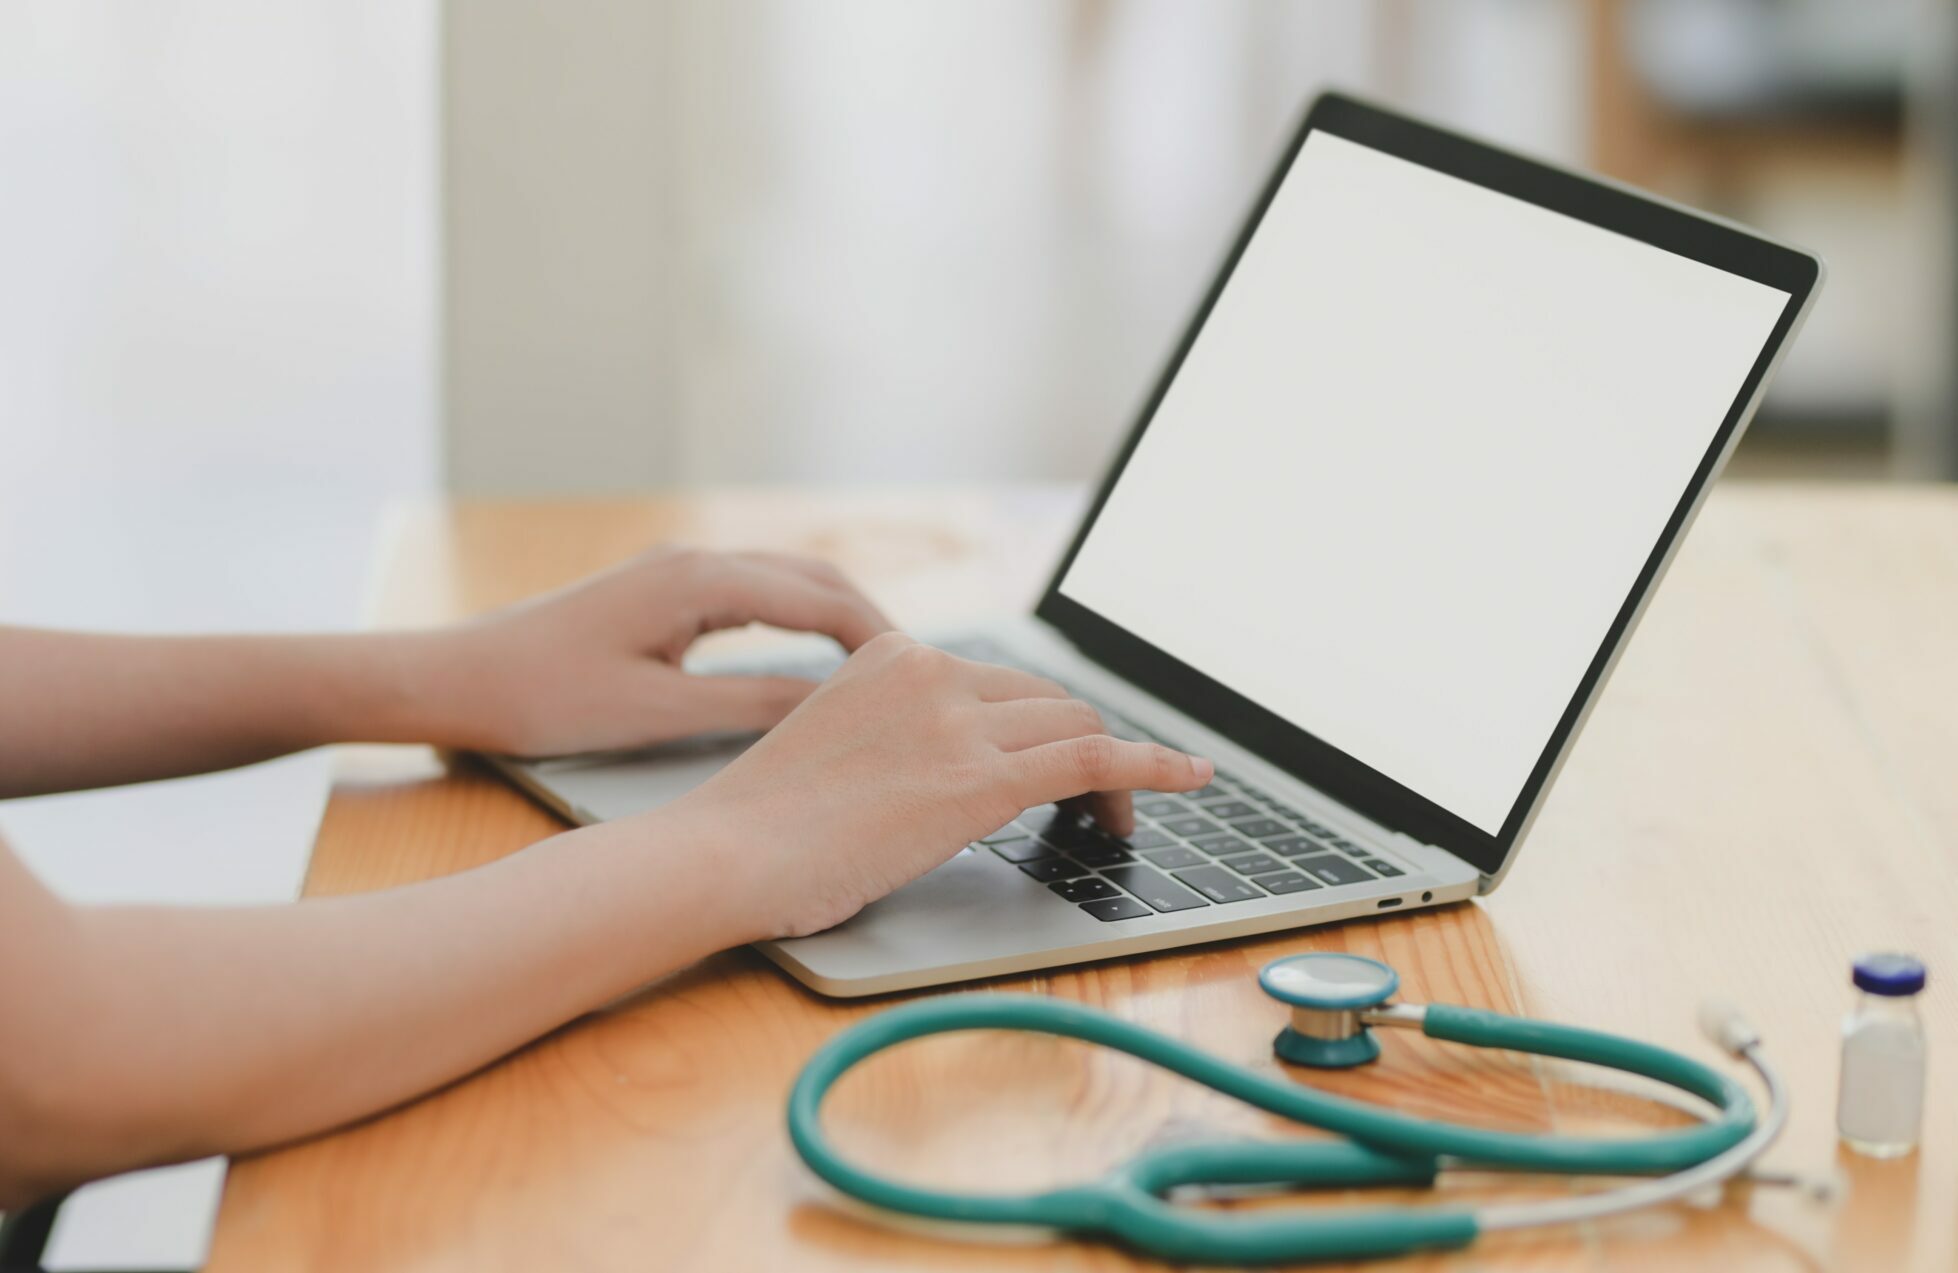 laptop-near-teal-stethoscope-in-wooden-table-3758756